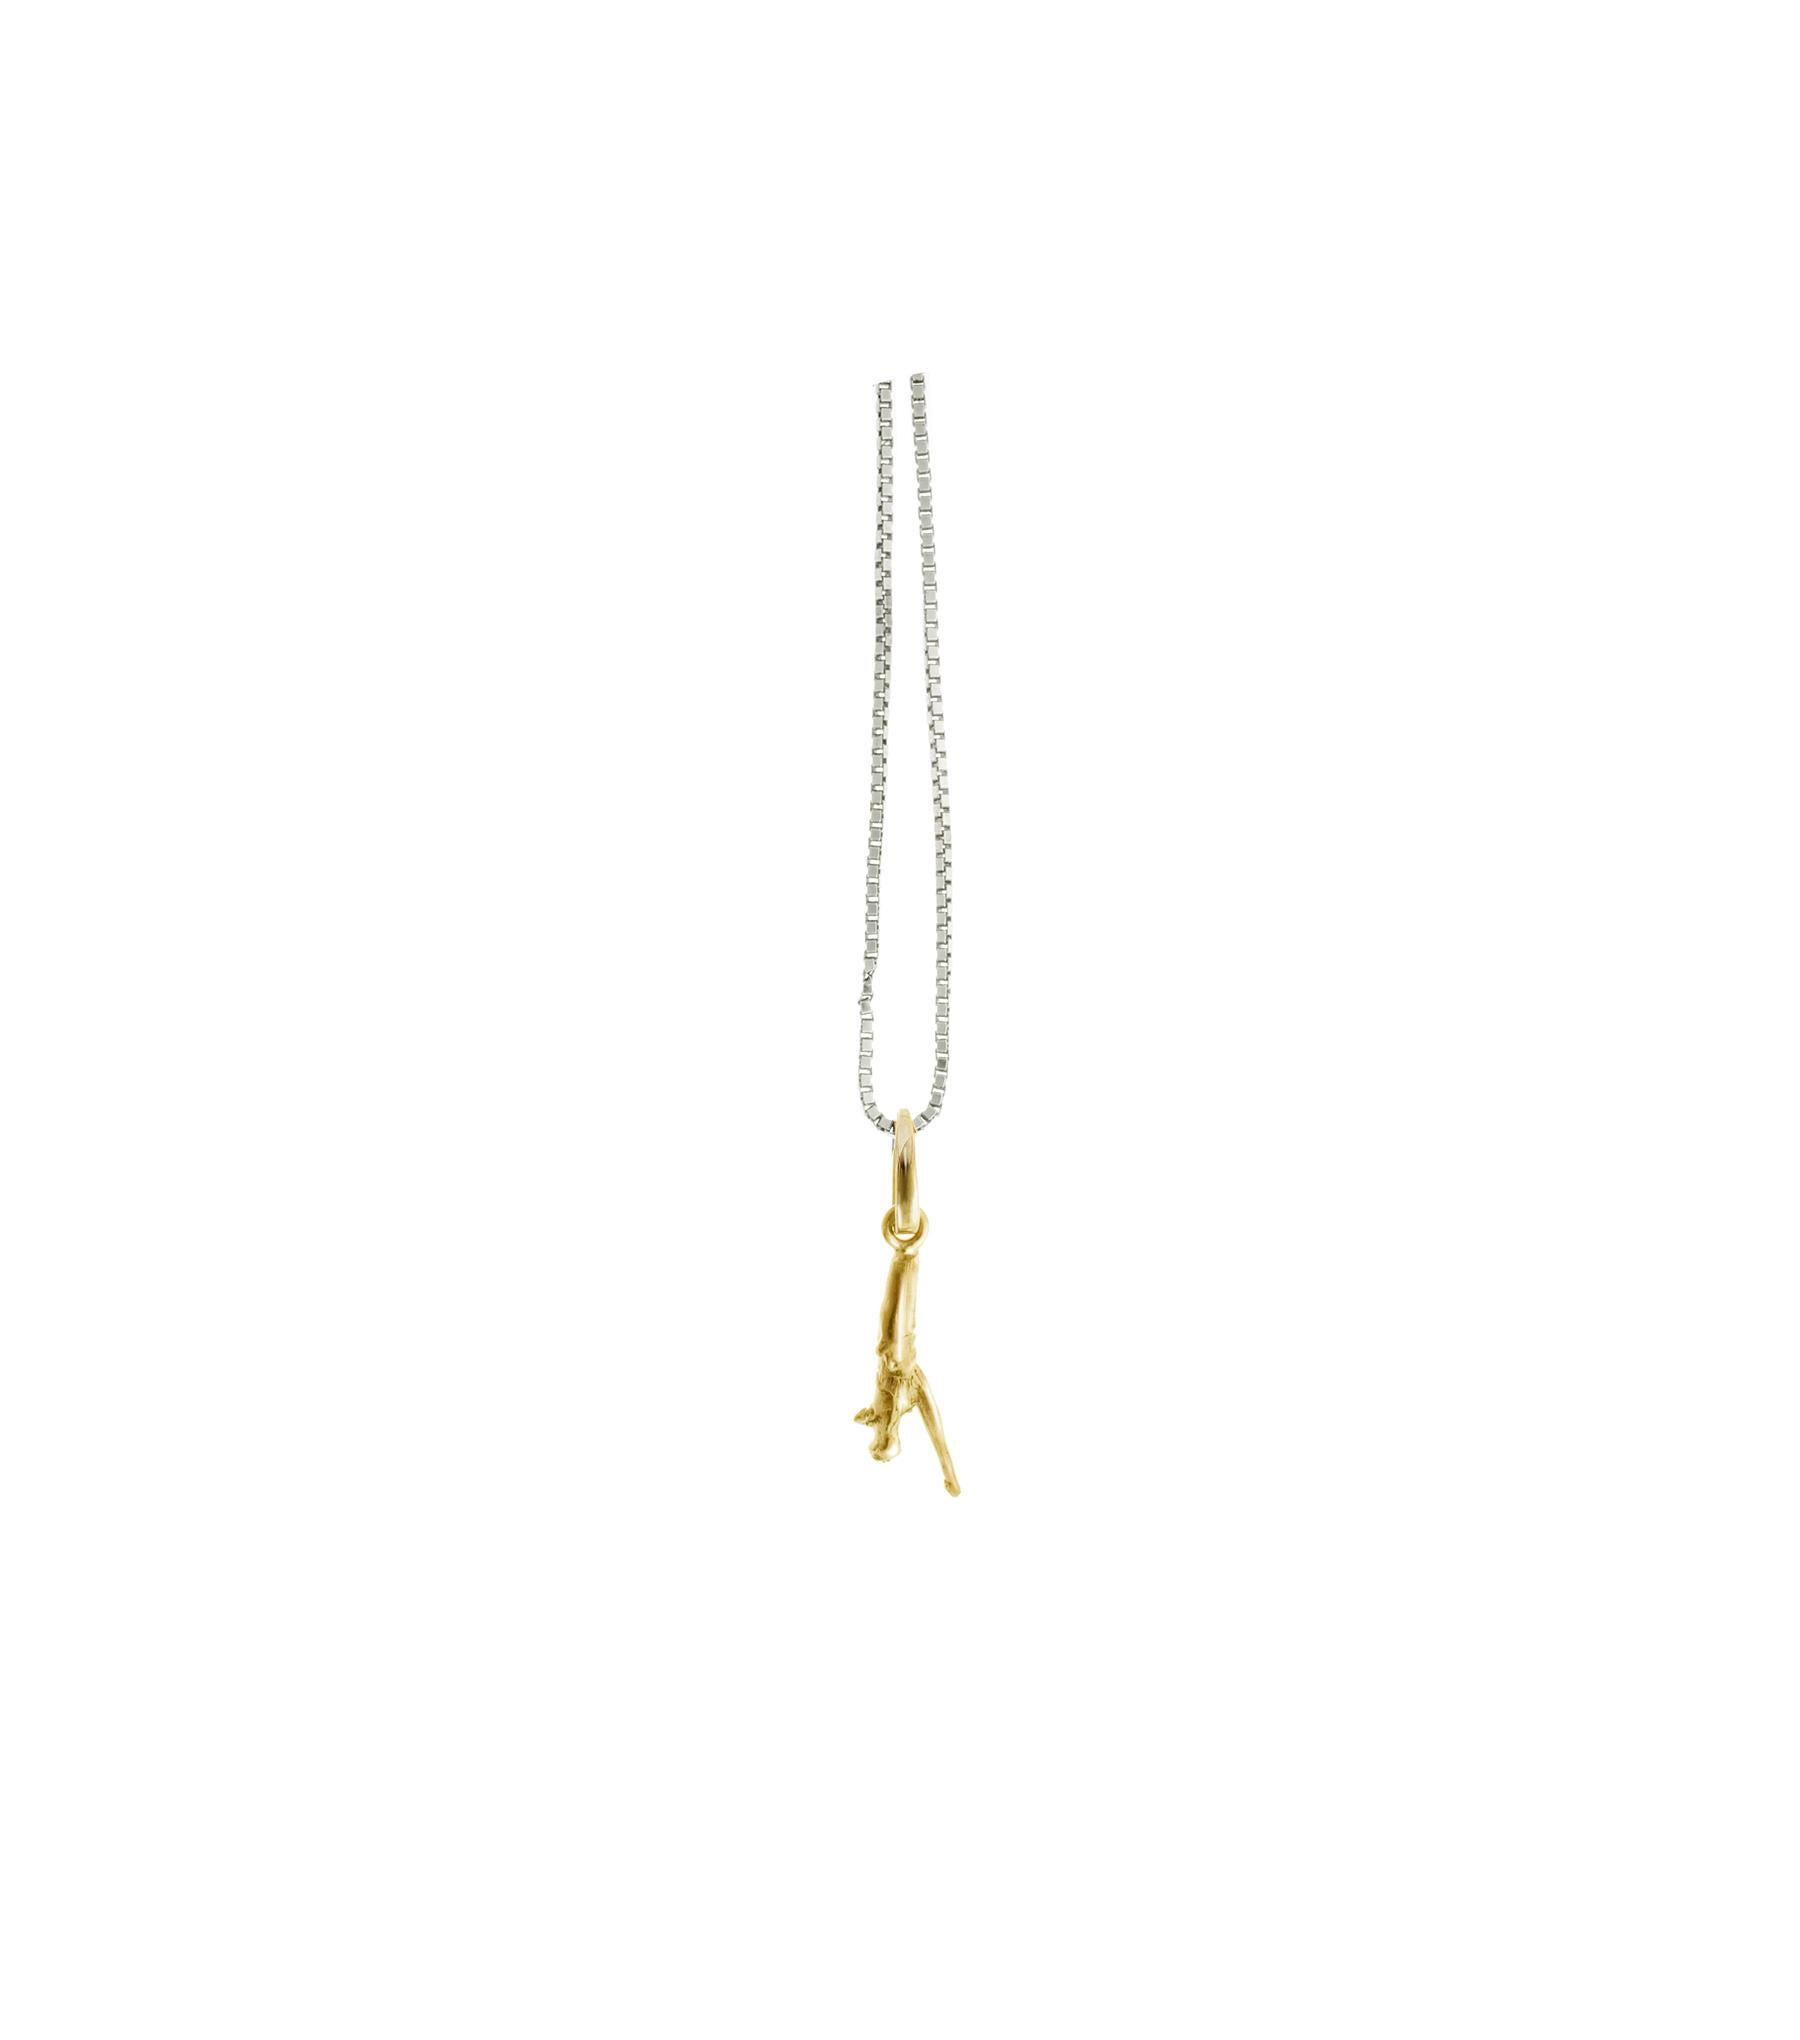 This 18 karat yellow gold Tea twig Chainka Sculptural pendant is the jewellery by artist piece, which opens the collection of “tiny pieces”. This delicate shape has been discovered during a tea ceremony when one little young leaf of tea came into an